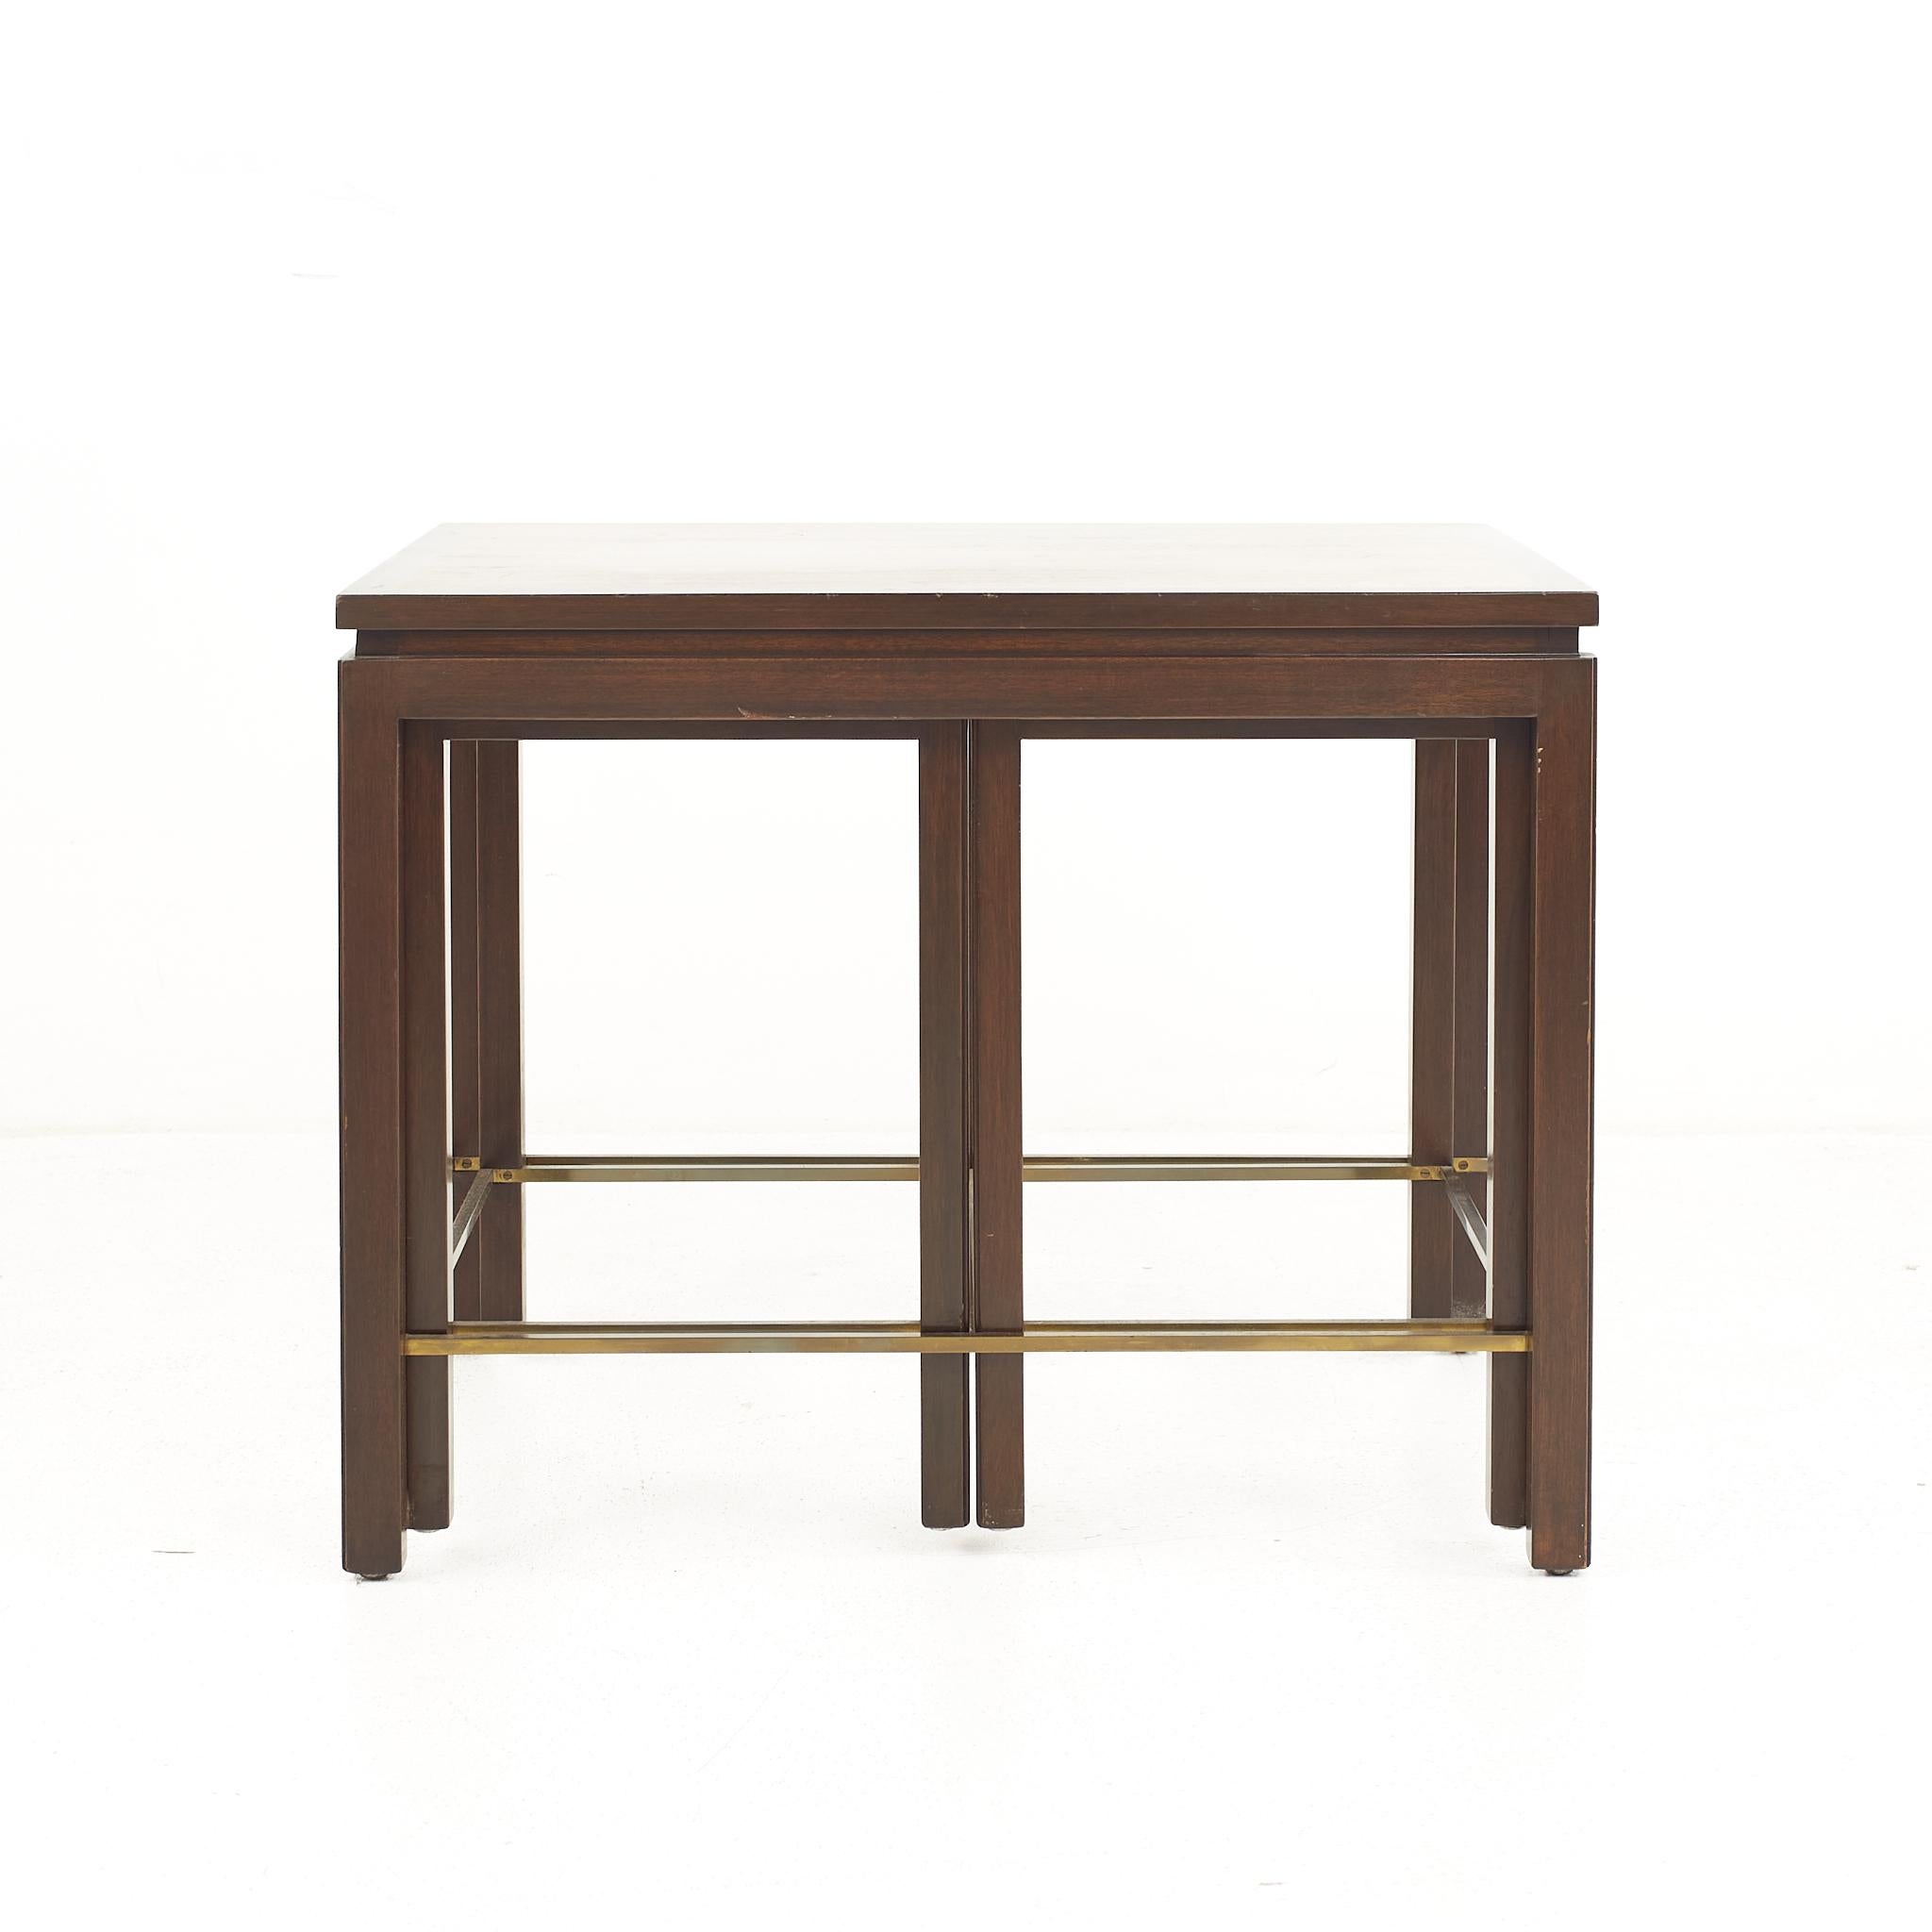 Edward Wormley for Dunbar mid century brass and mahogany nesting table set

The table measure: 28 wide x 20 deep x 22.25 inches high; the nesting tables measure 13 wide x 17.5 deep x 20.75 inches high

All pieces of furniture can be had in what